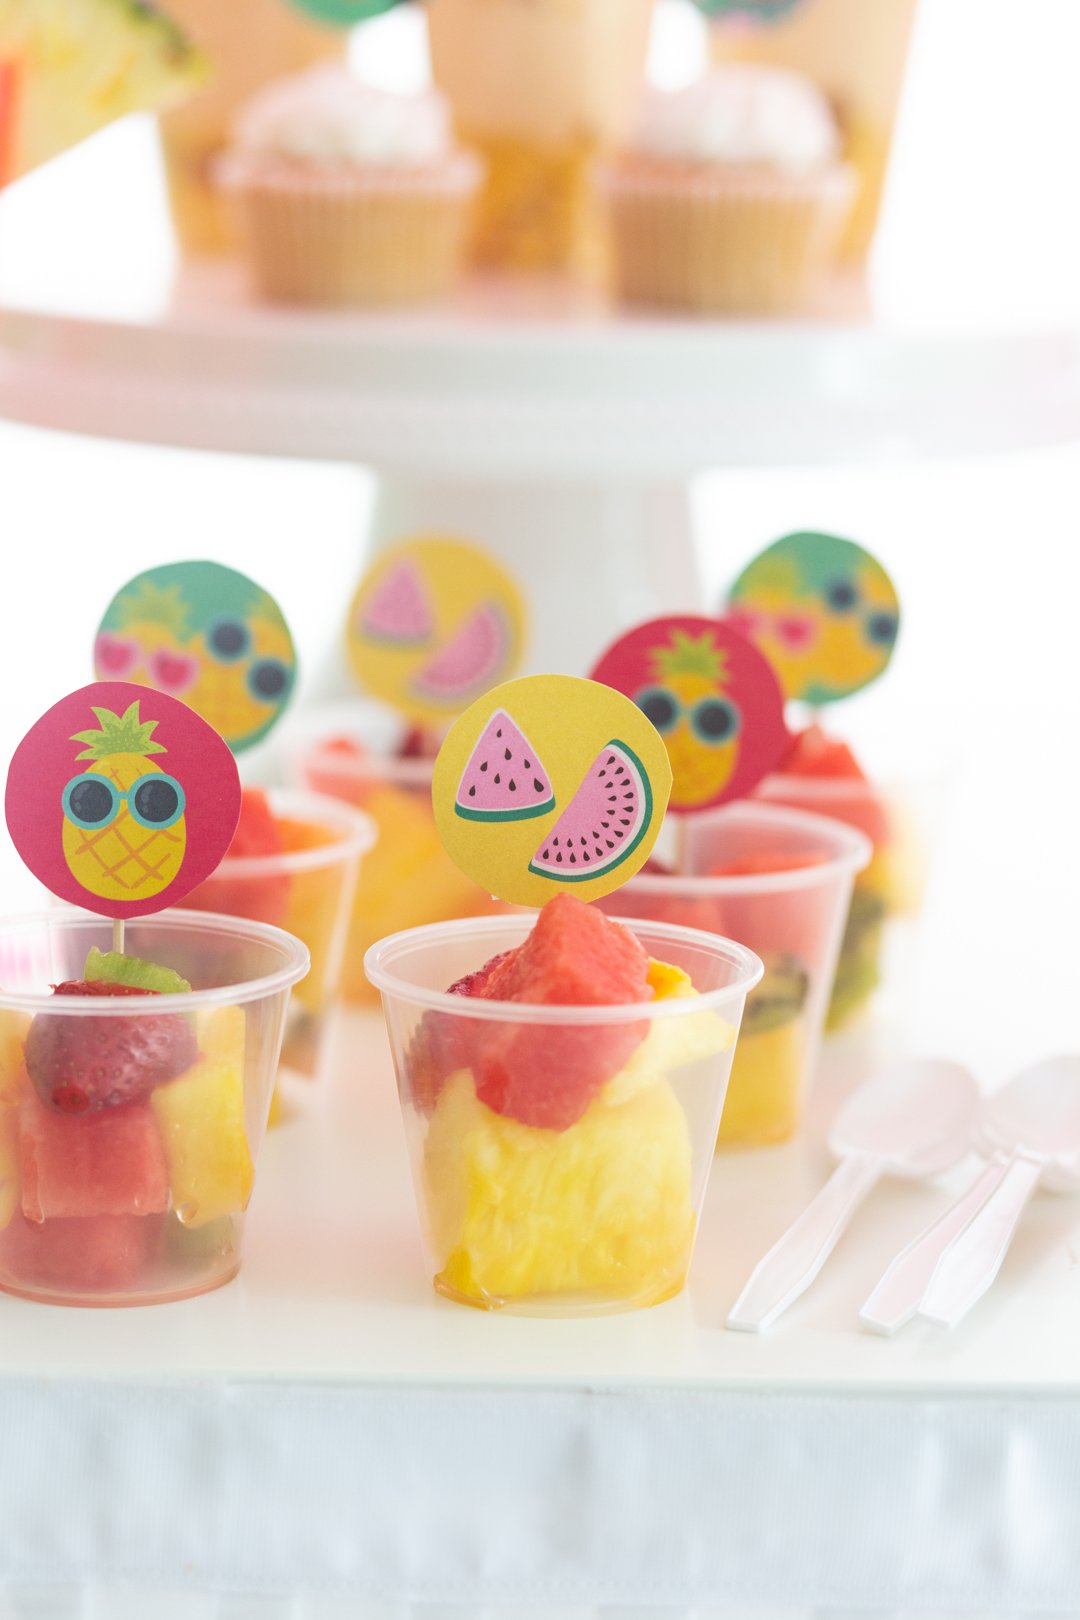 up close view of small fruit salad cups